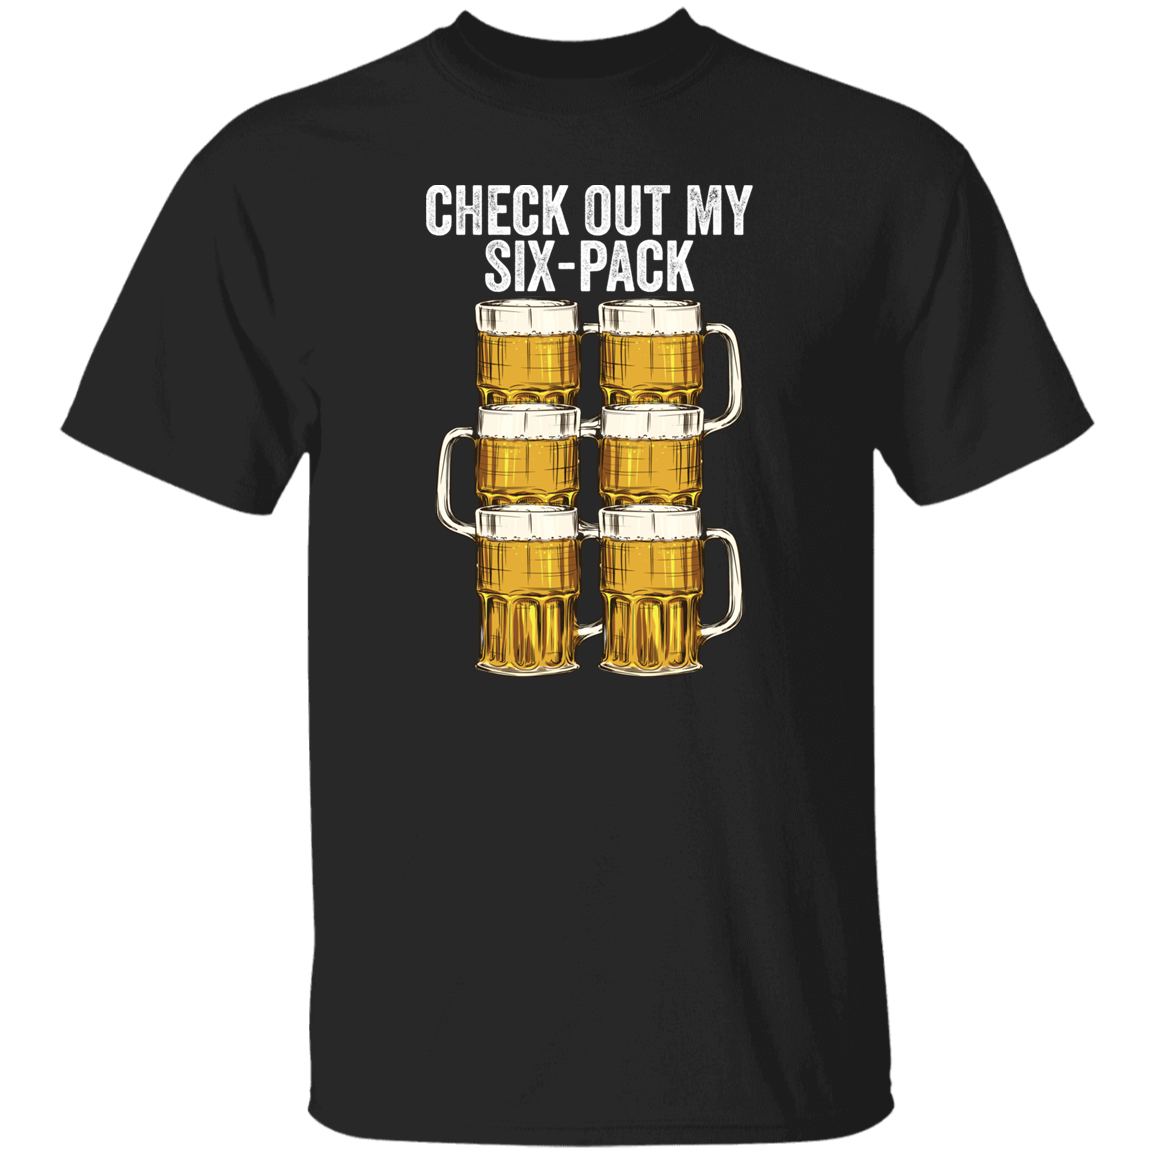 Check Out My Six Pack Beer Apparel CustomCat G500 5.3 oz. T-Shirt Black S